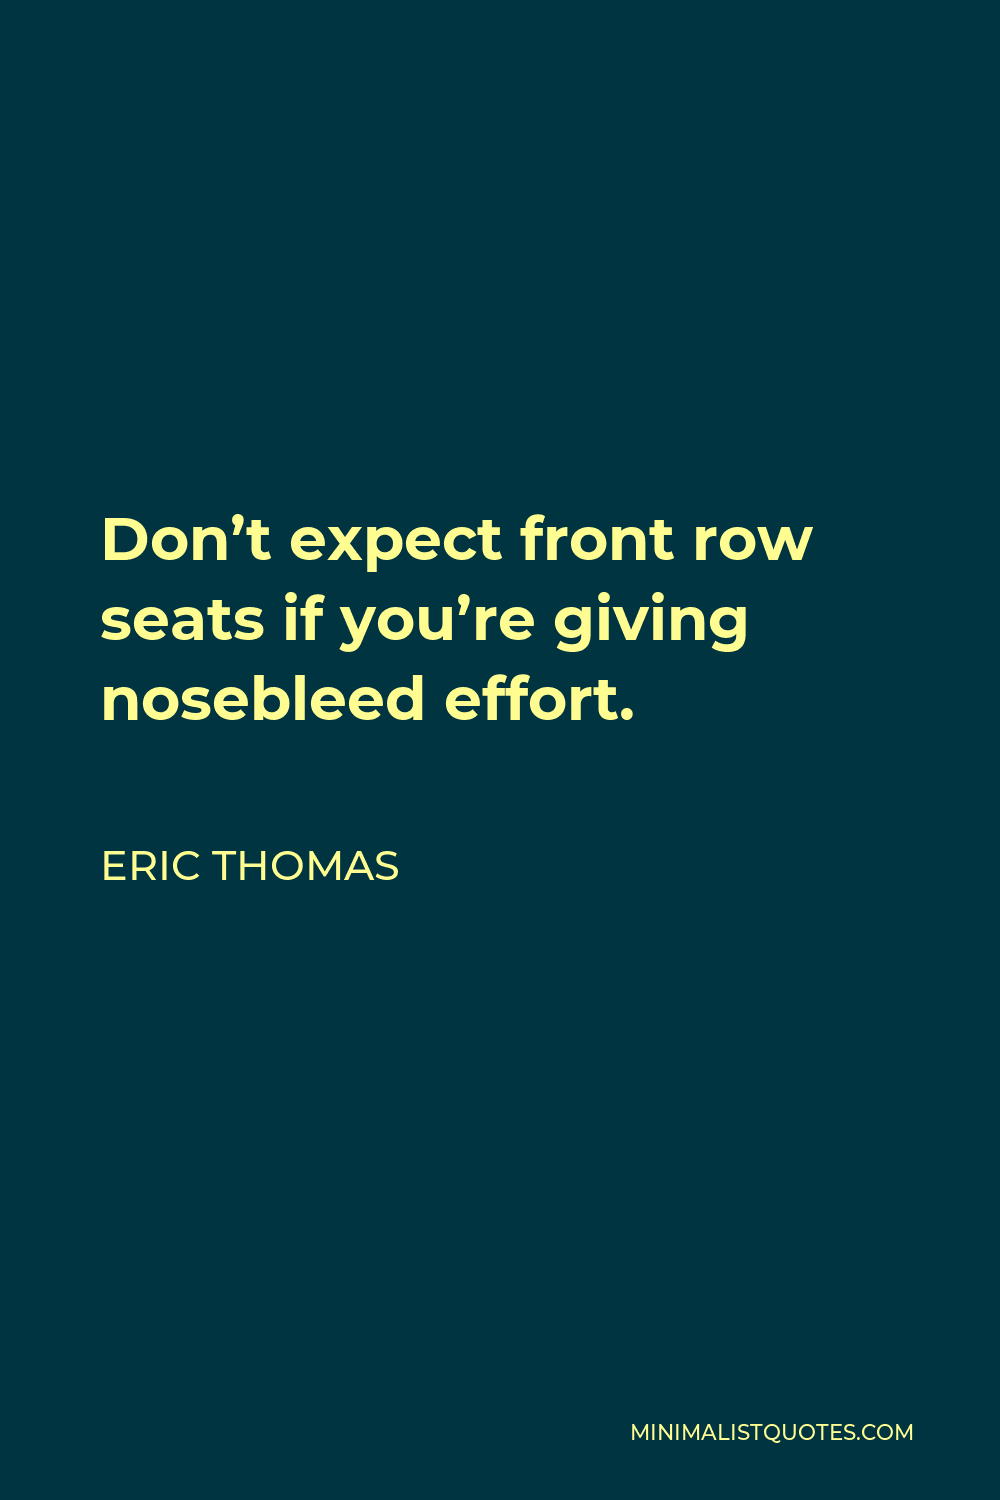 Eric Thomas Quote - Don’t expect front row seats if you’re giving nosebleed effort.